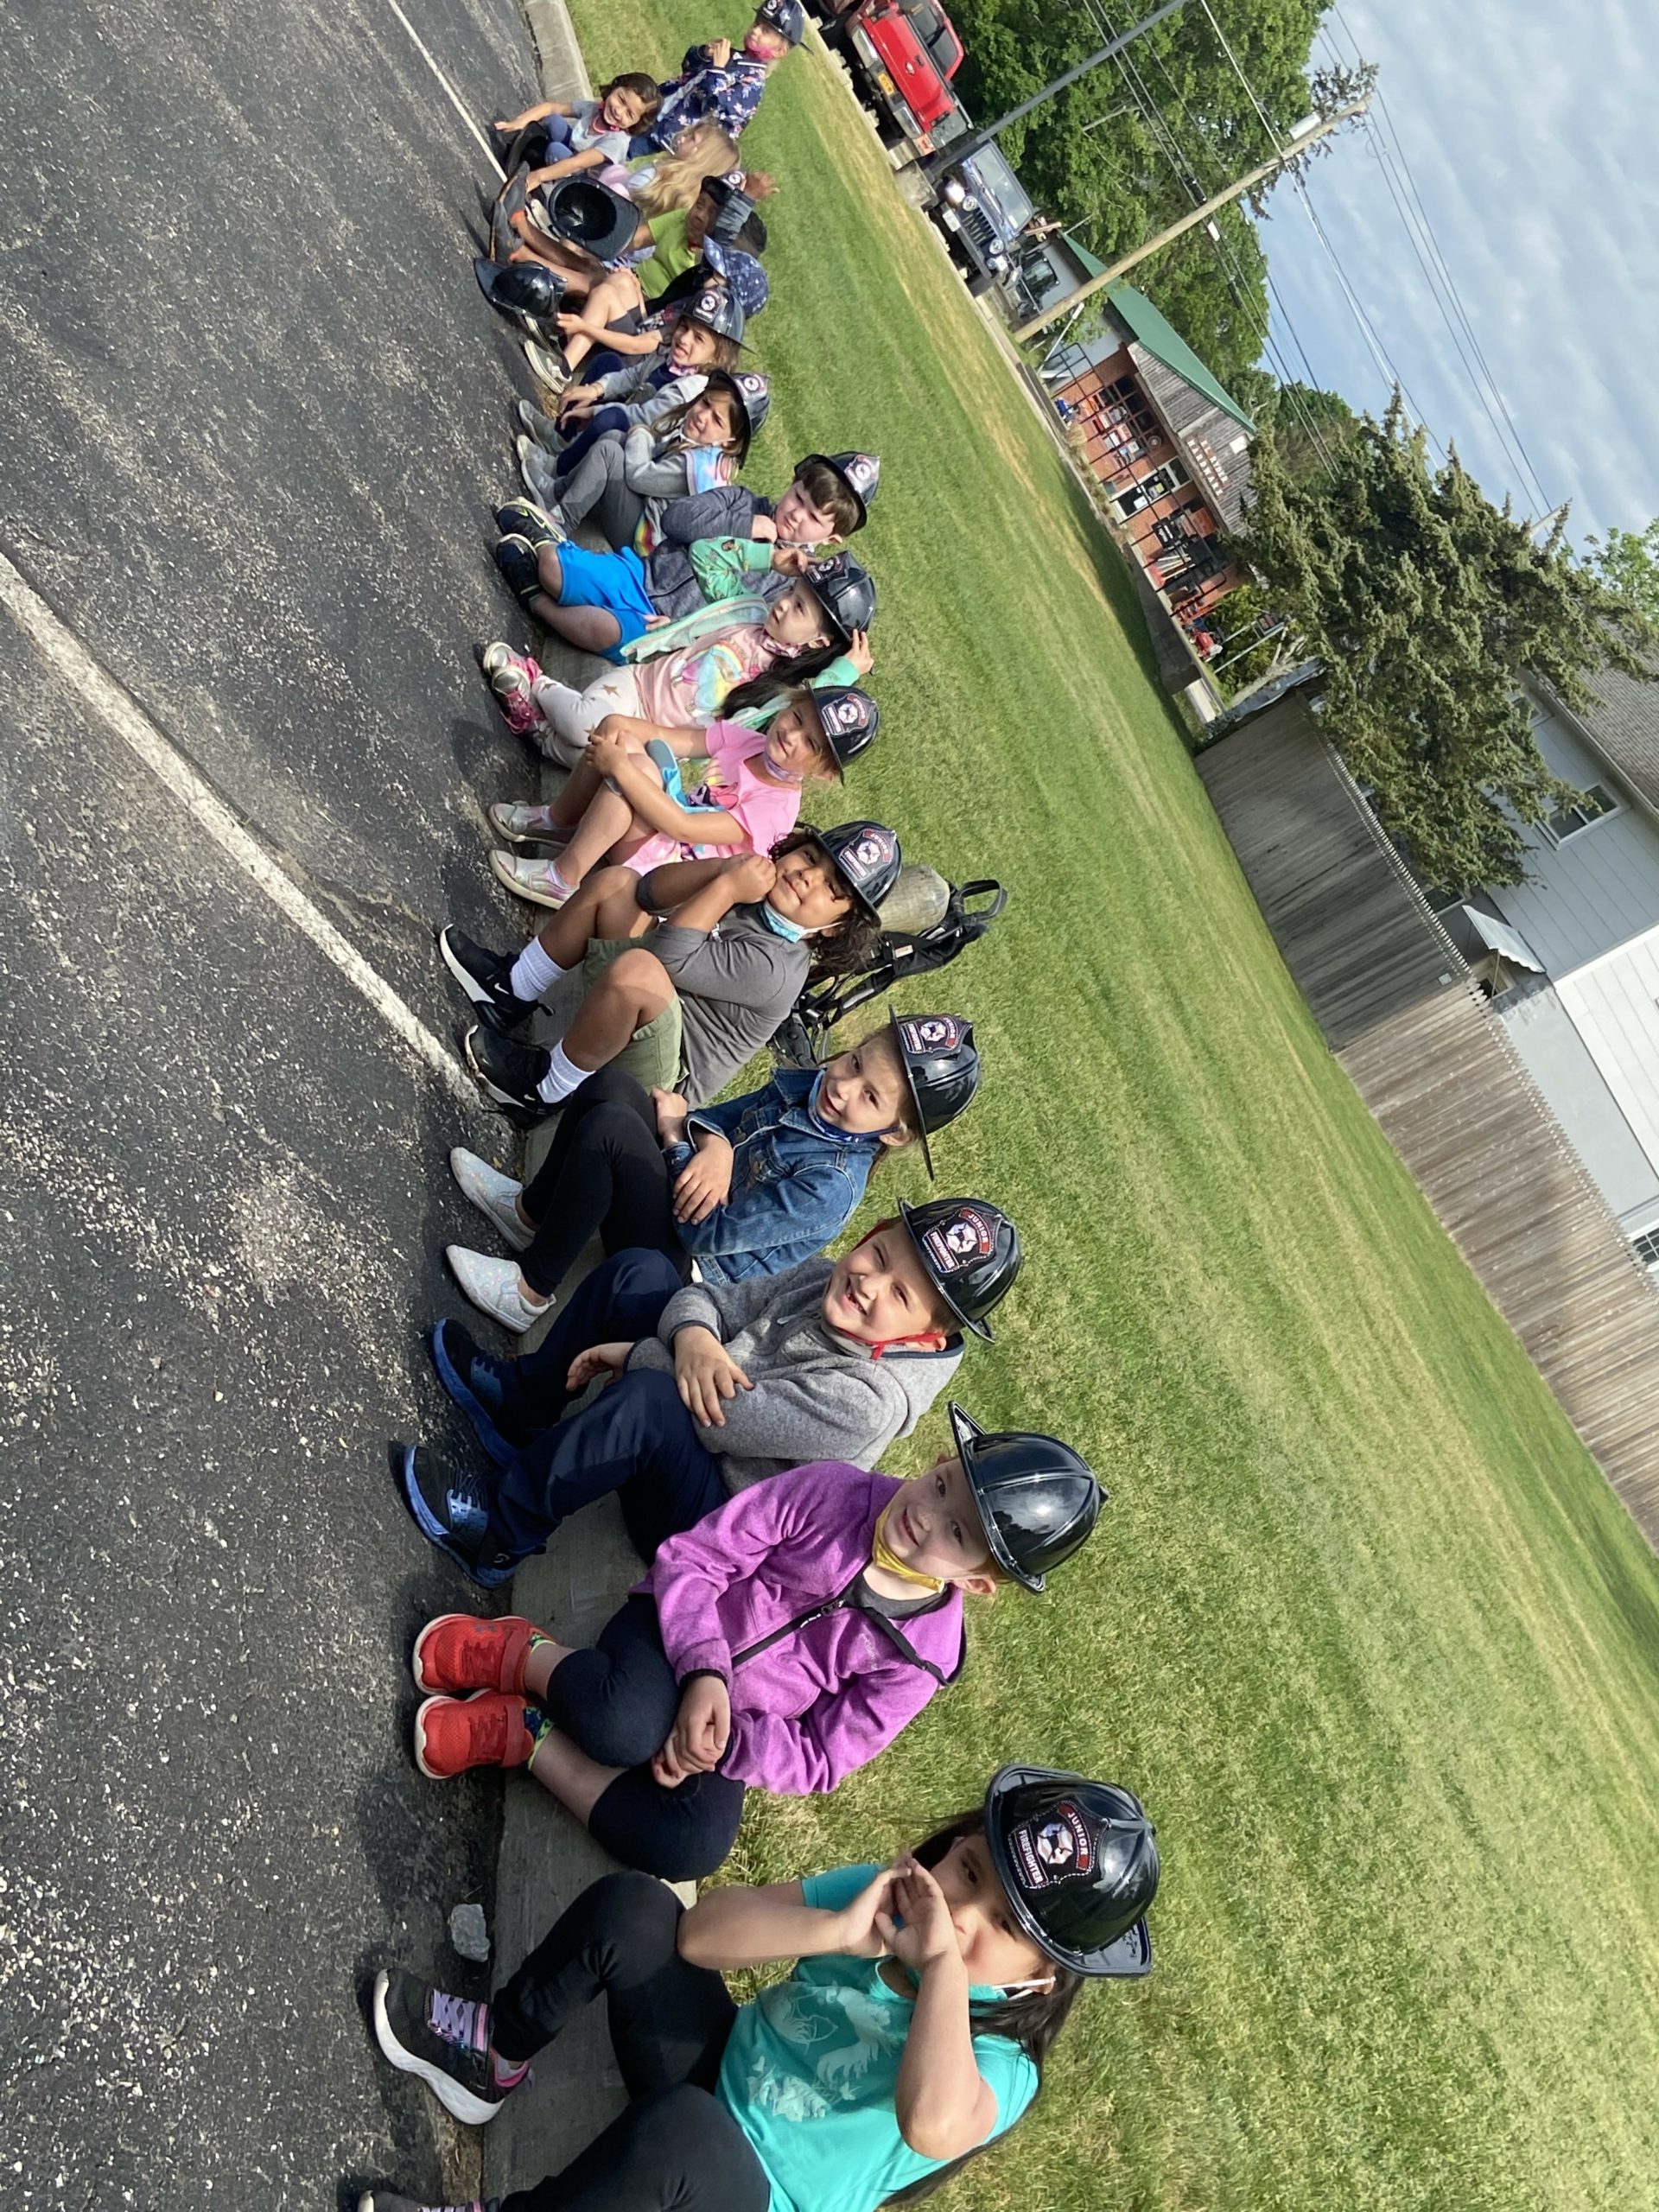 Kindergarten students from East Quogue Elementary School walked to the East Quogue Fire Department station to learn about local volunteers and fire safety. Students explored the different fire trucks, ambulances and had a turn shooting the fire hose.